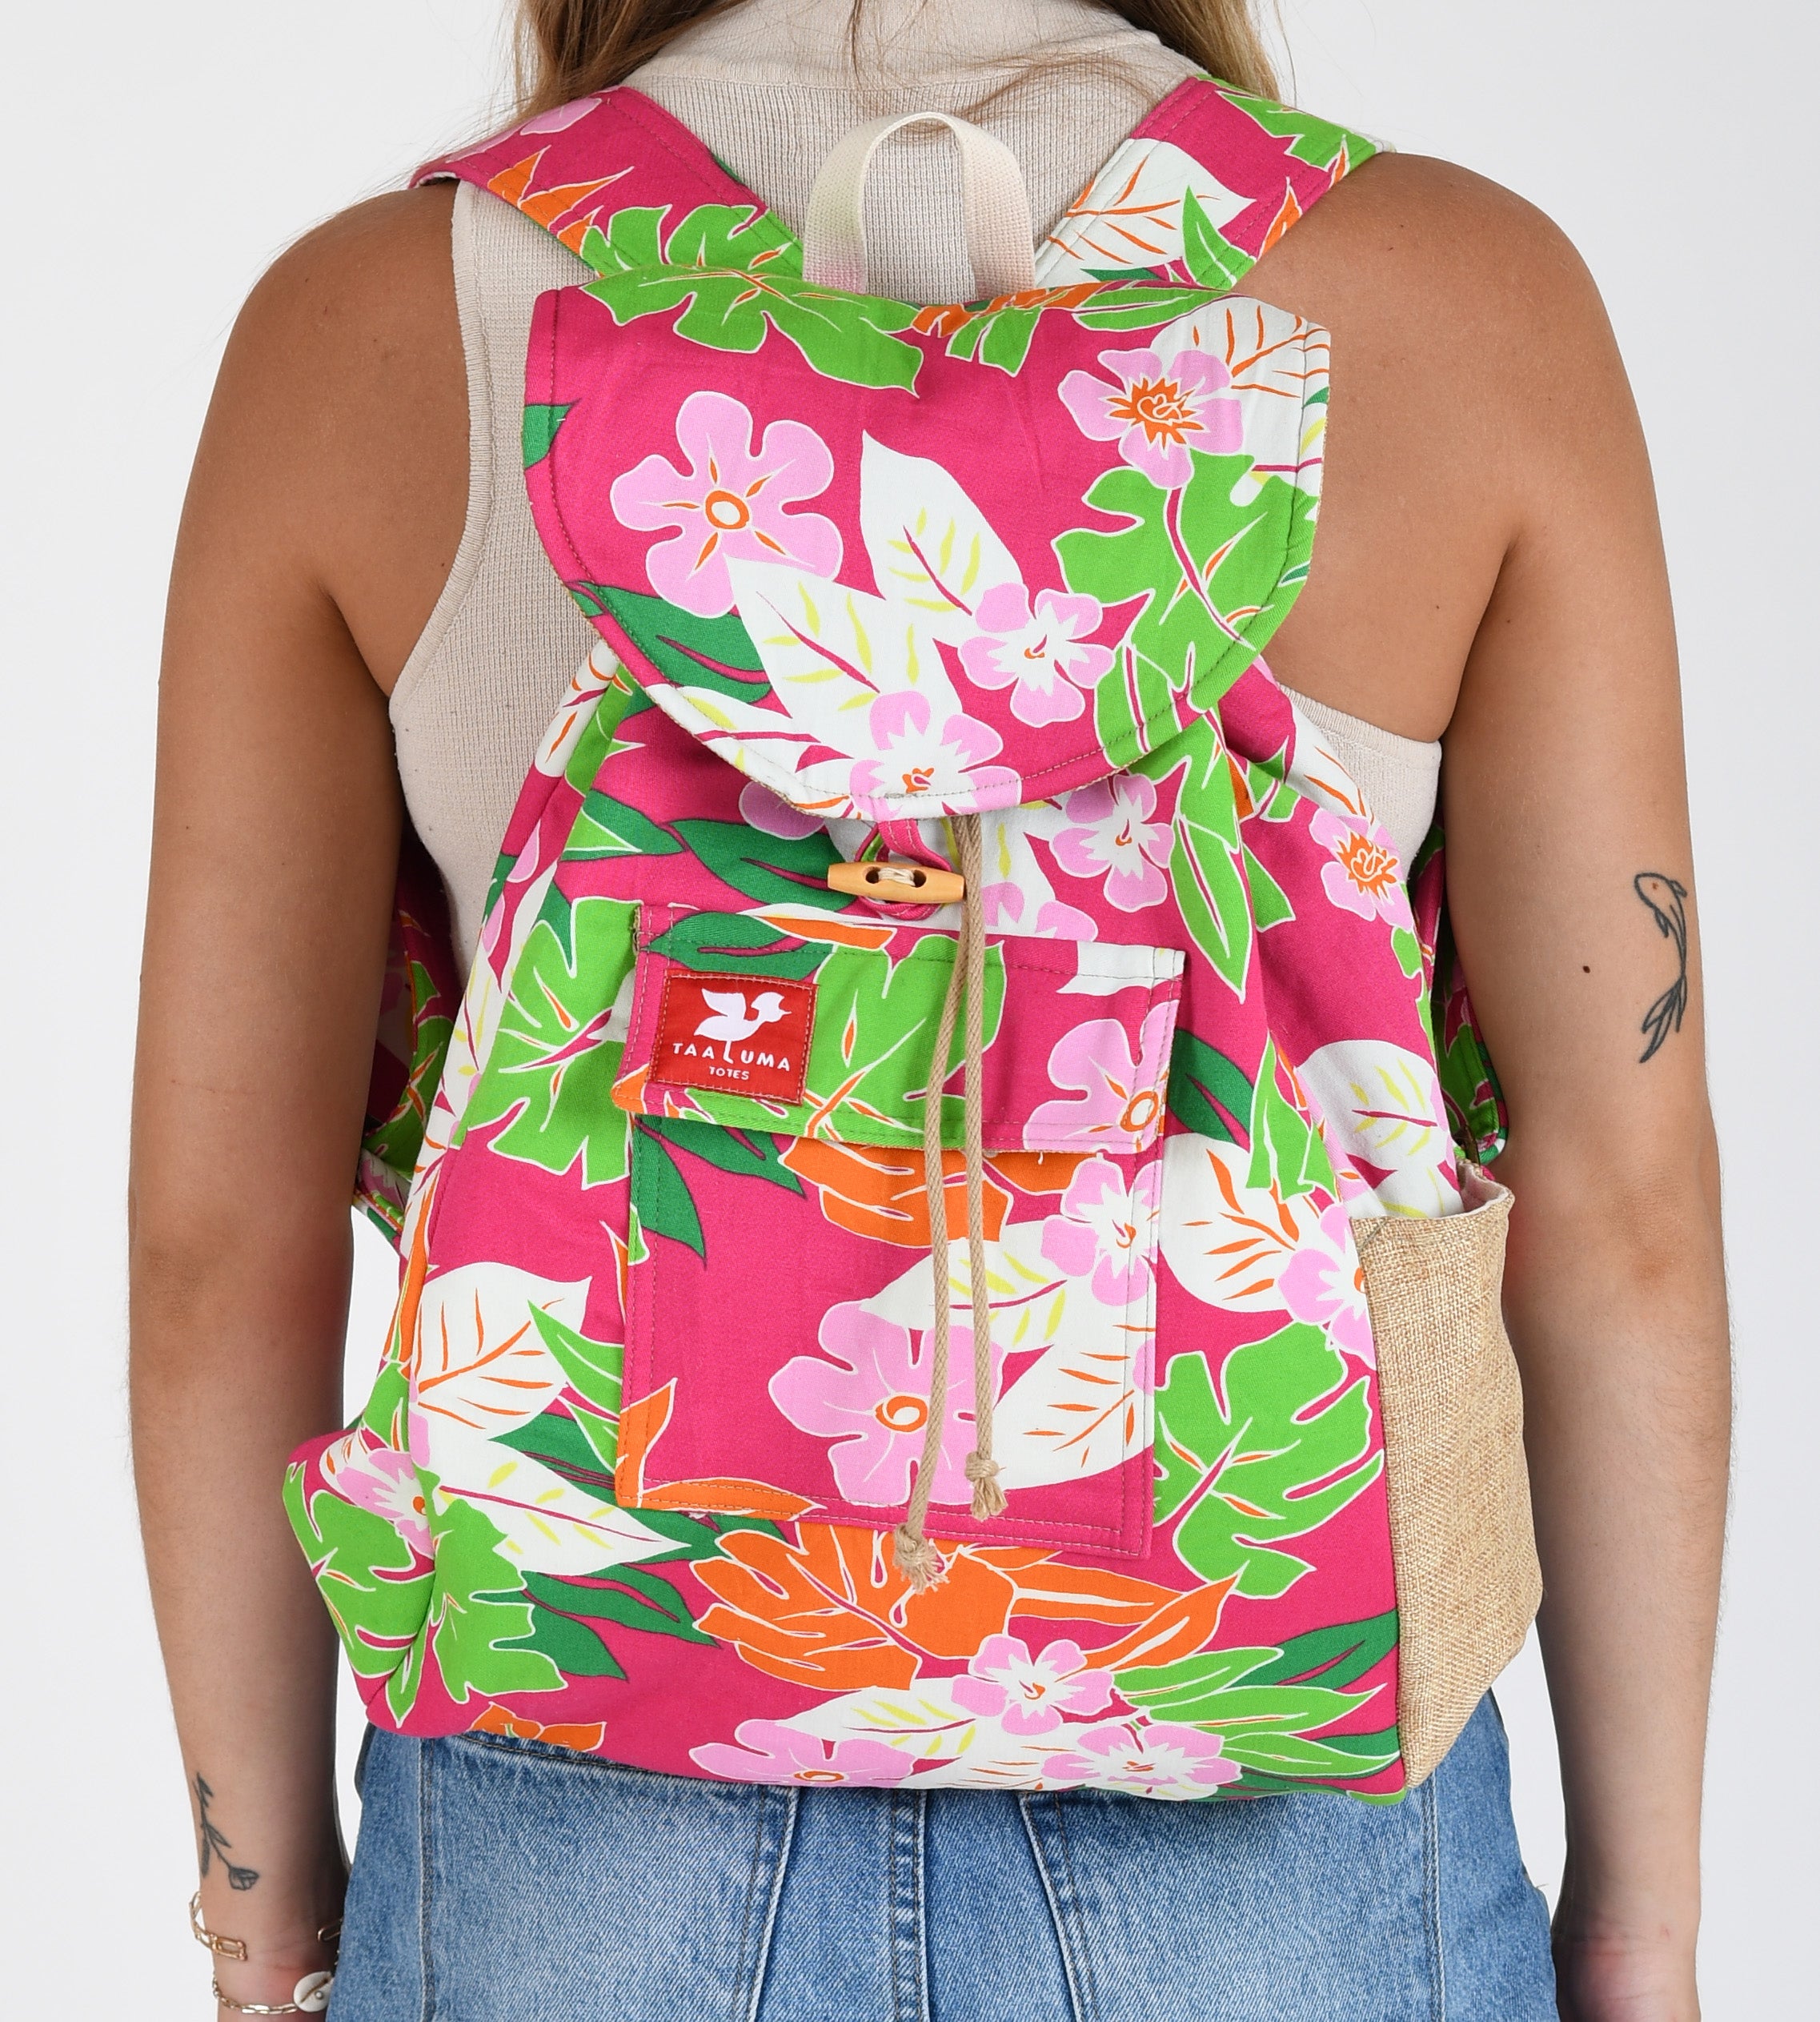 Hawaii Tote (by Tim Gibson)